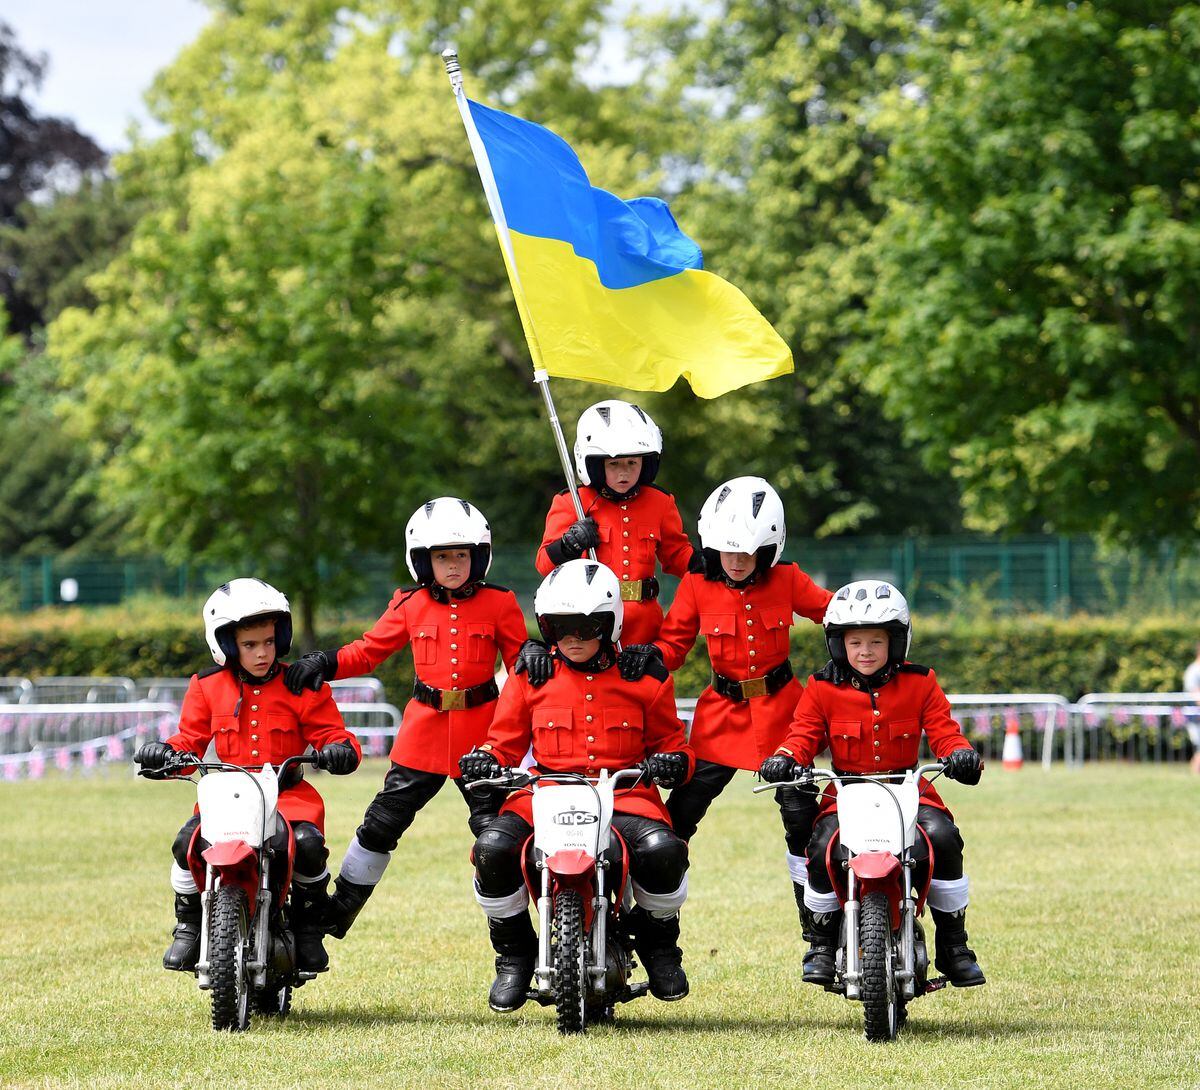 The IMPS Motorcycle Display Team demonstrated their skills and showed their support for Ukraine